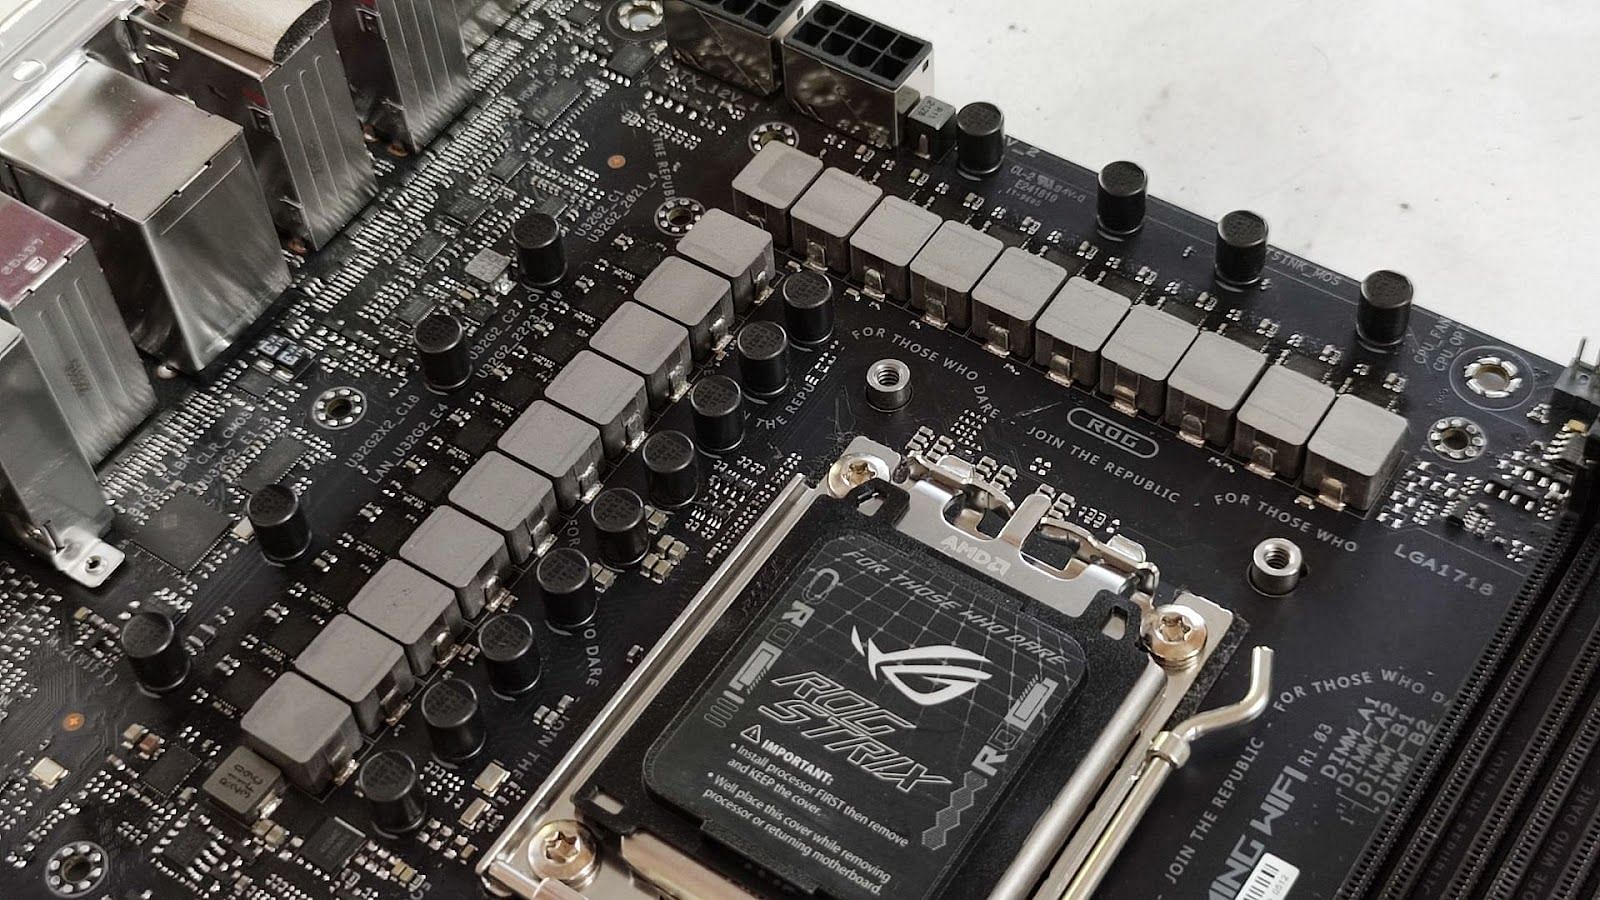 The 18+2-phase VRMs on the motherboard (Image via Sportskeeda)